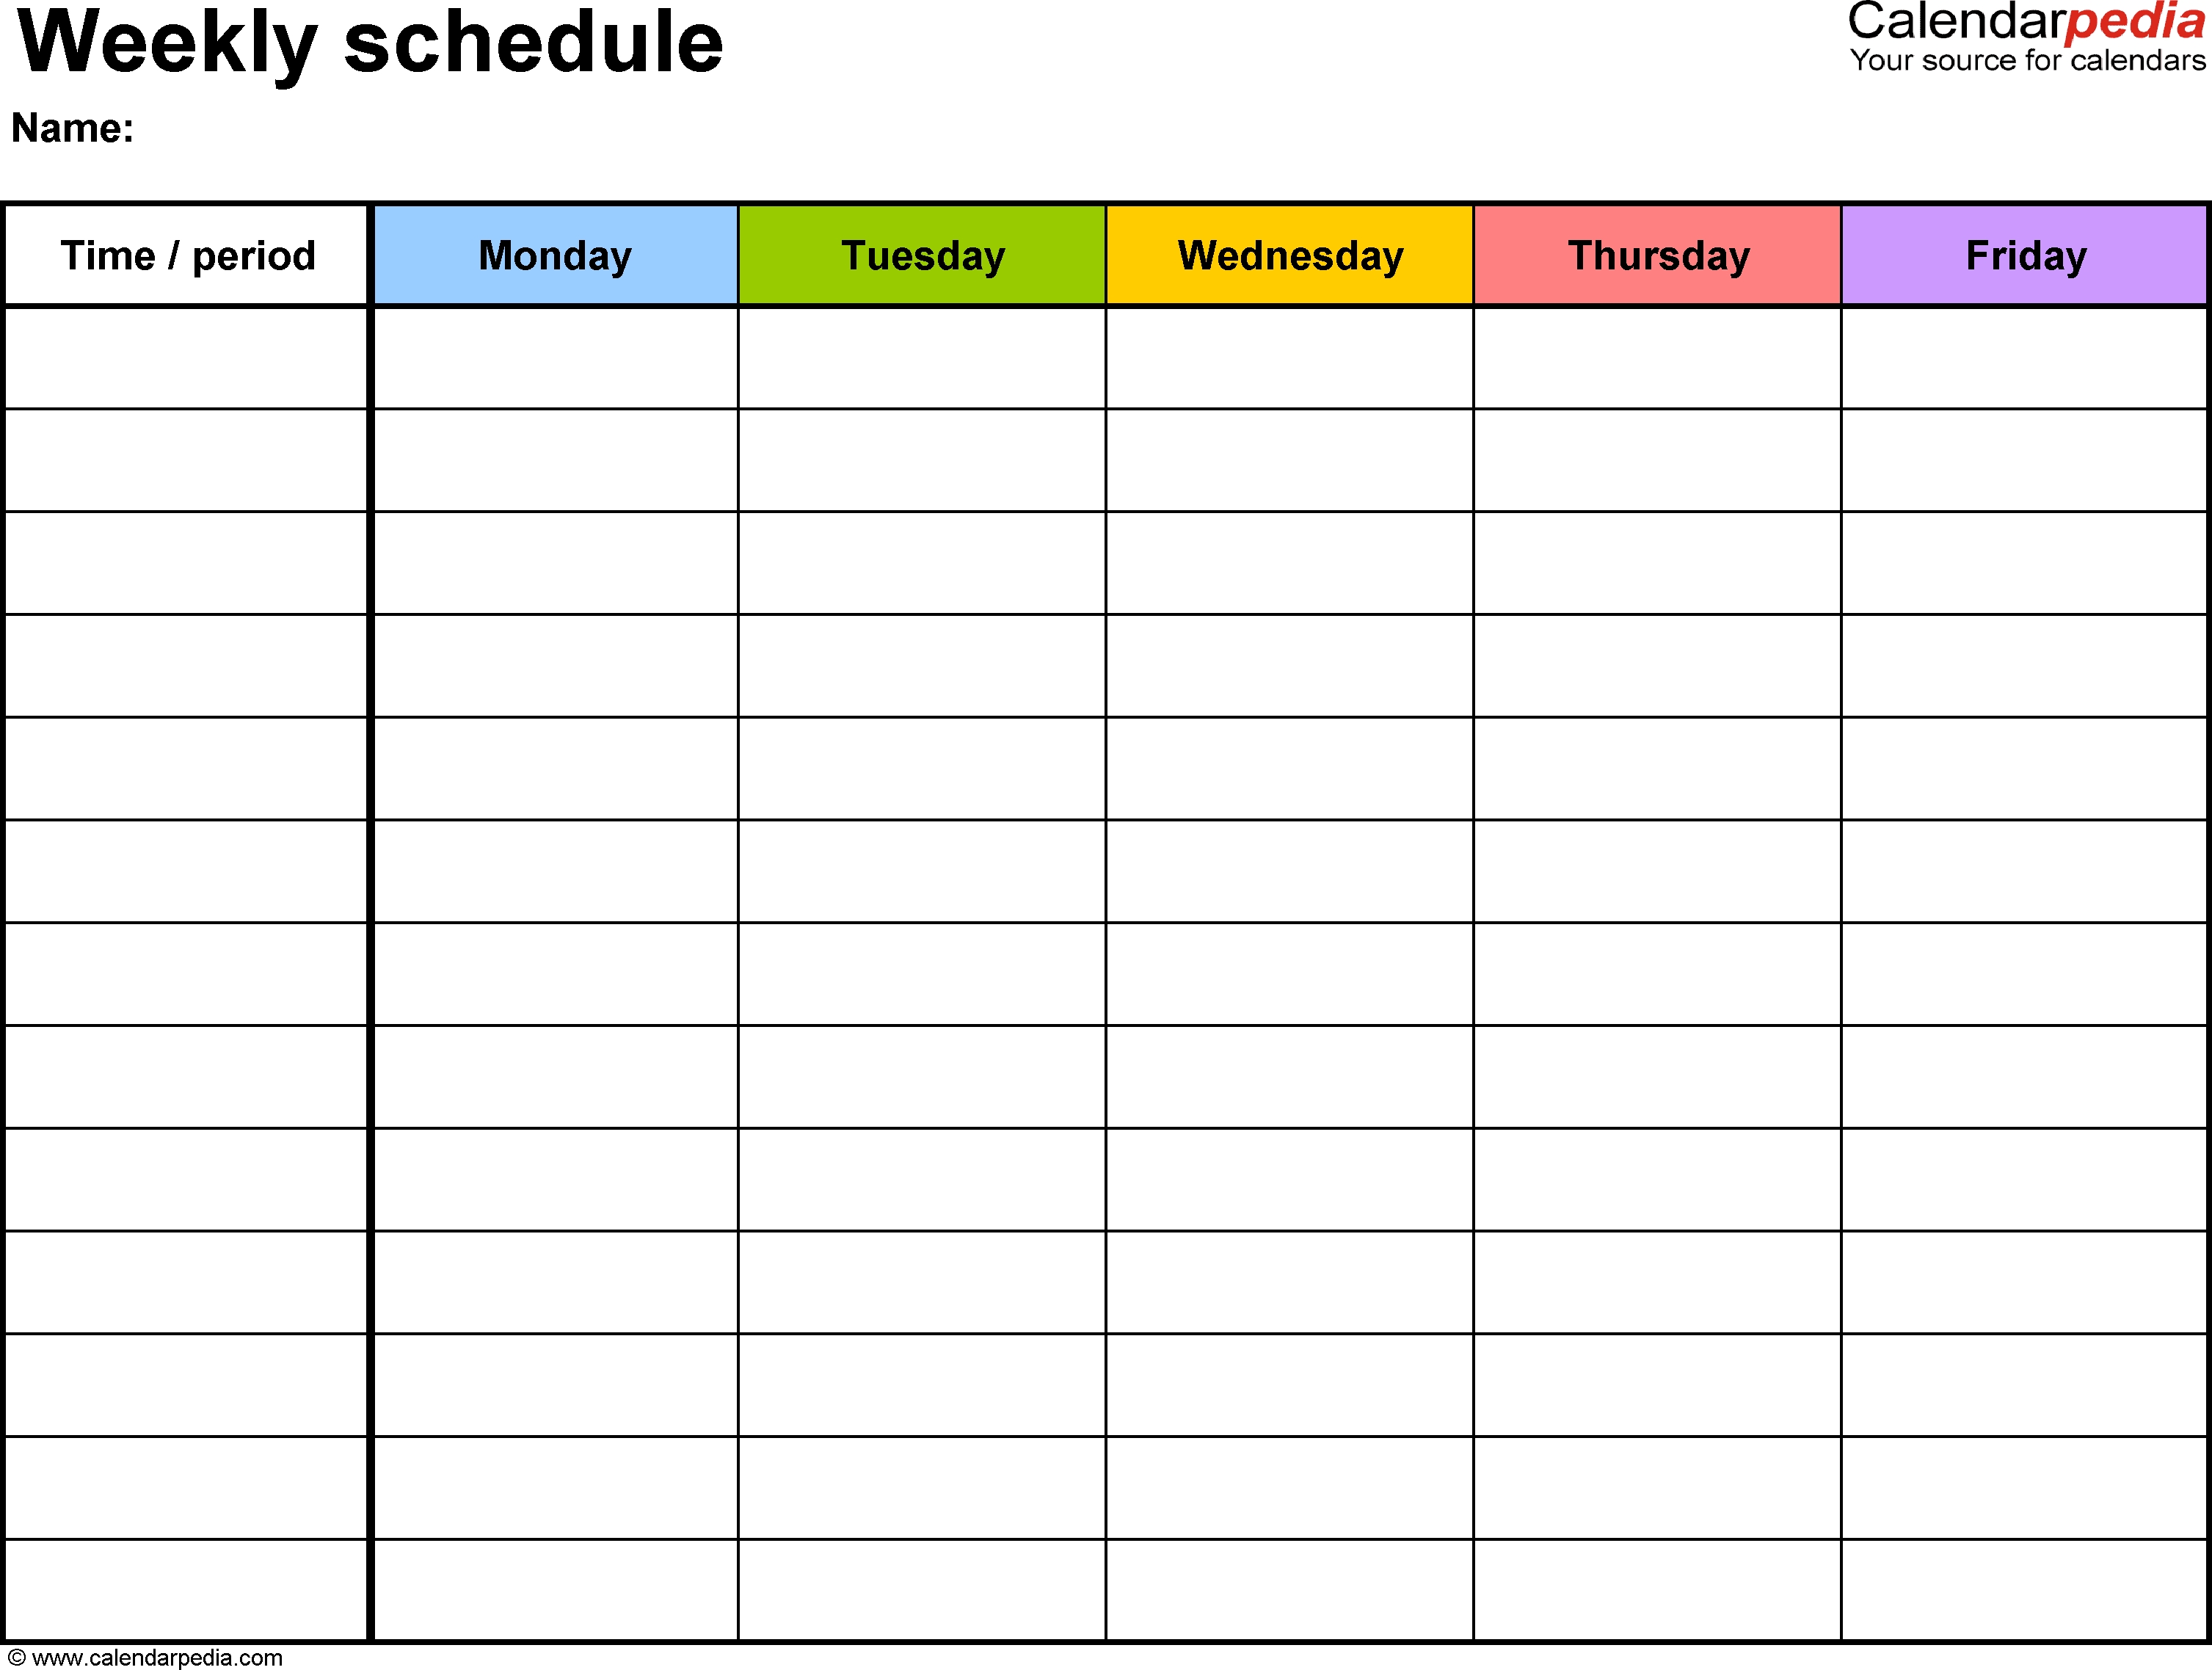 Free Weekly Schedule Templates For Pdf - 18 Templates Perky Printable Weekly Calendar Monday Start